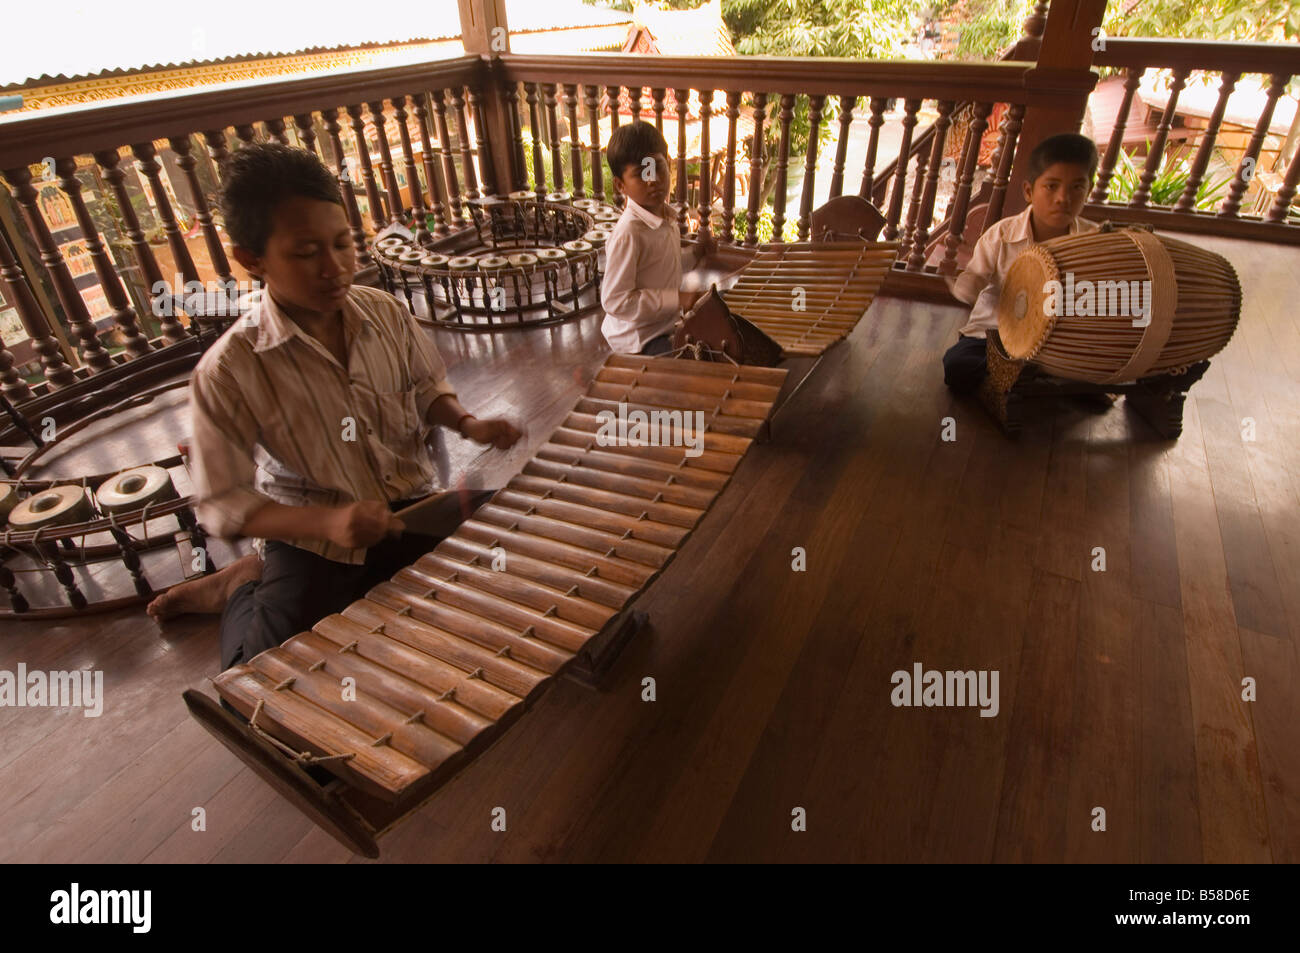 Musicians in the Royal Palace, Phnom Penh, Cambodia, Indochina, Southeast Asia Stock Photo